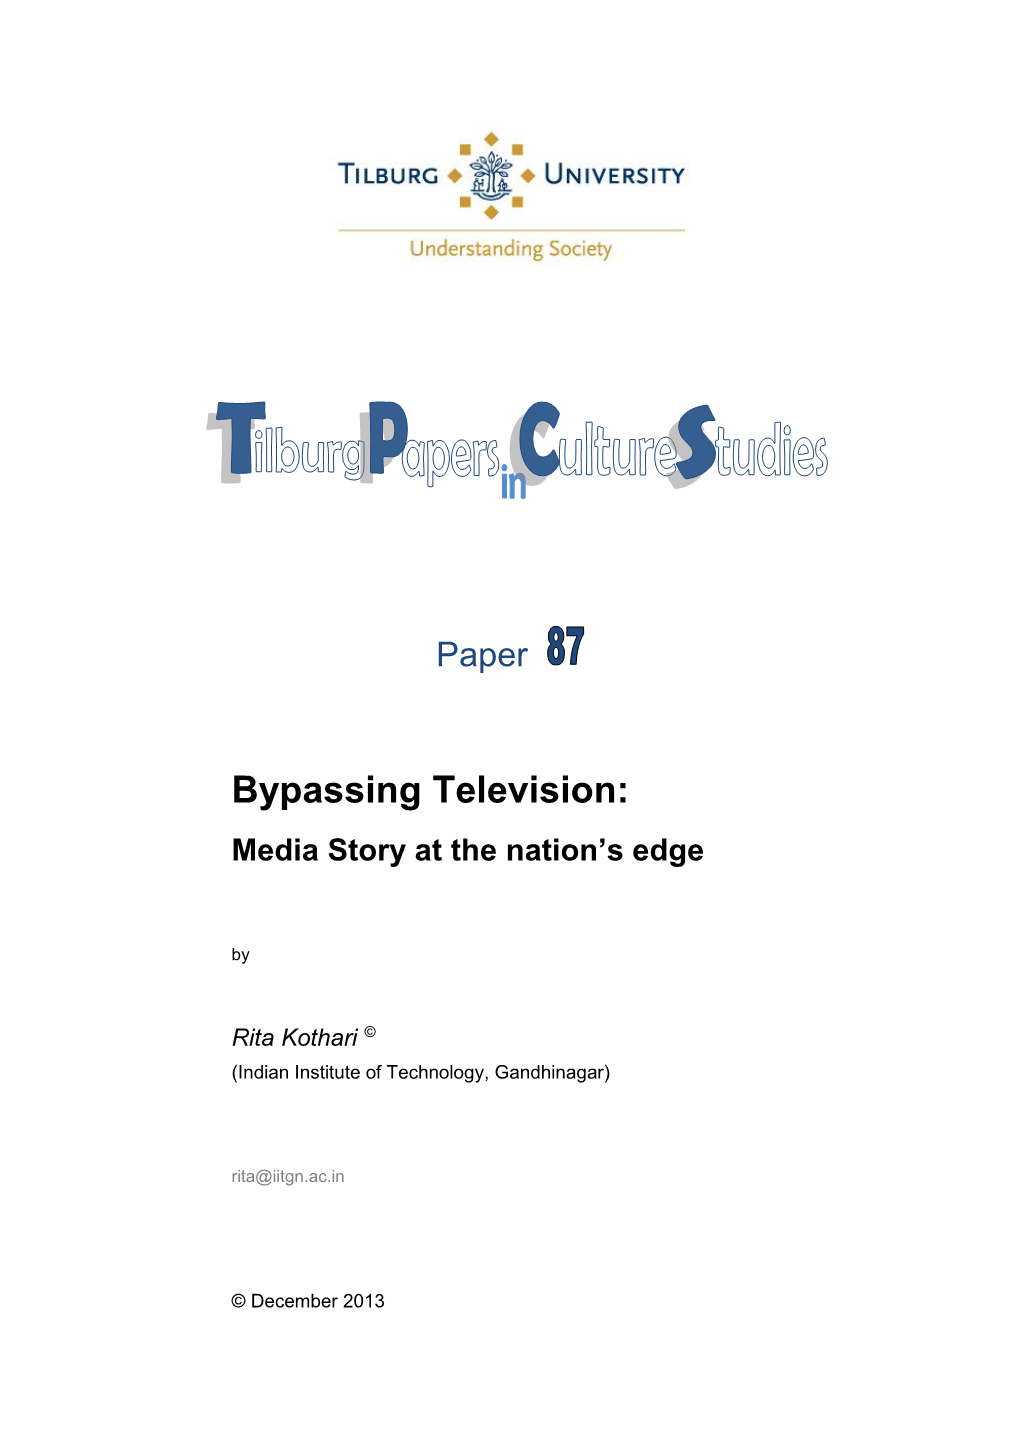 Bypassing Television: Media Story at the Nation's Edge